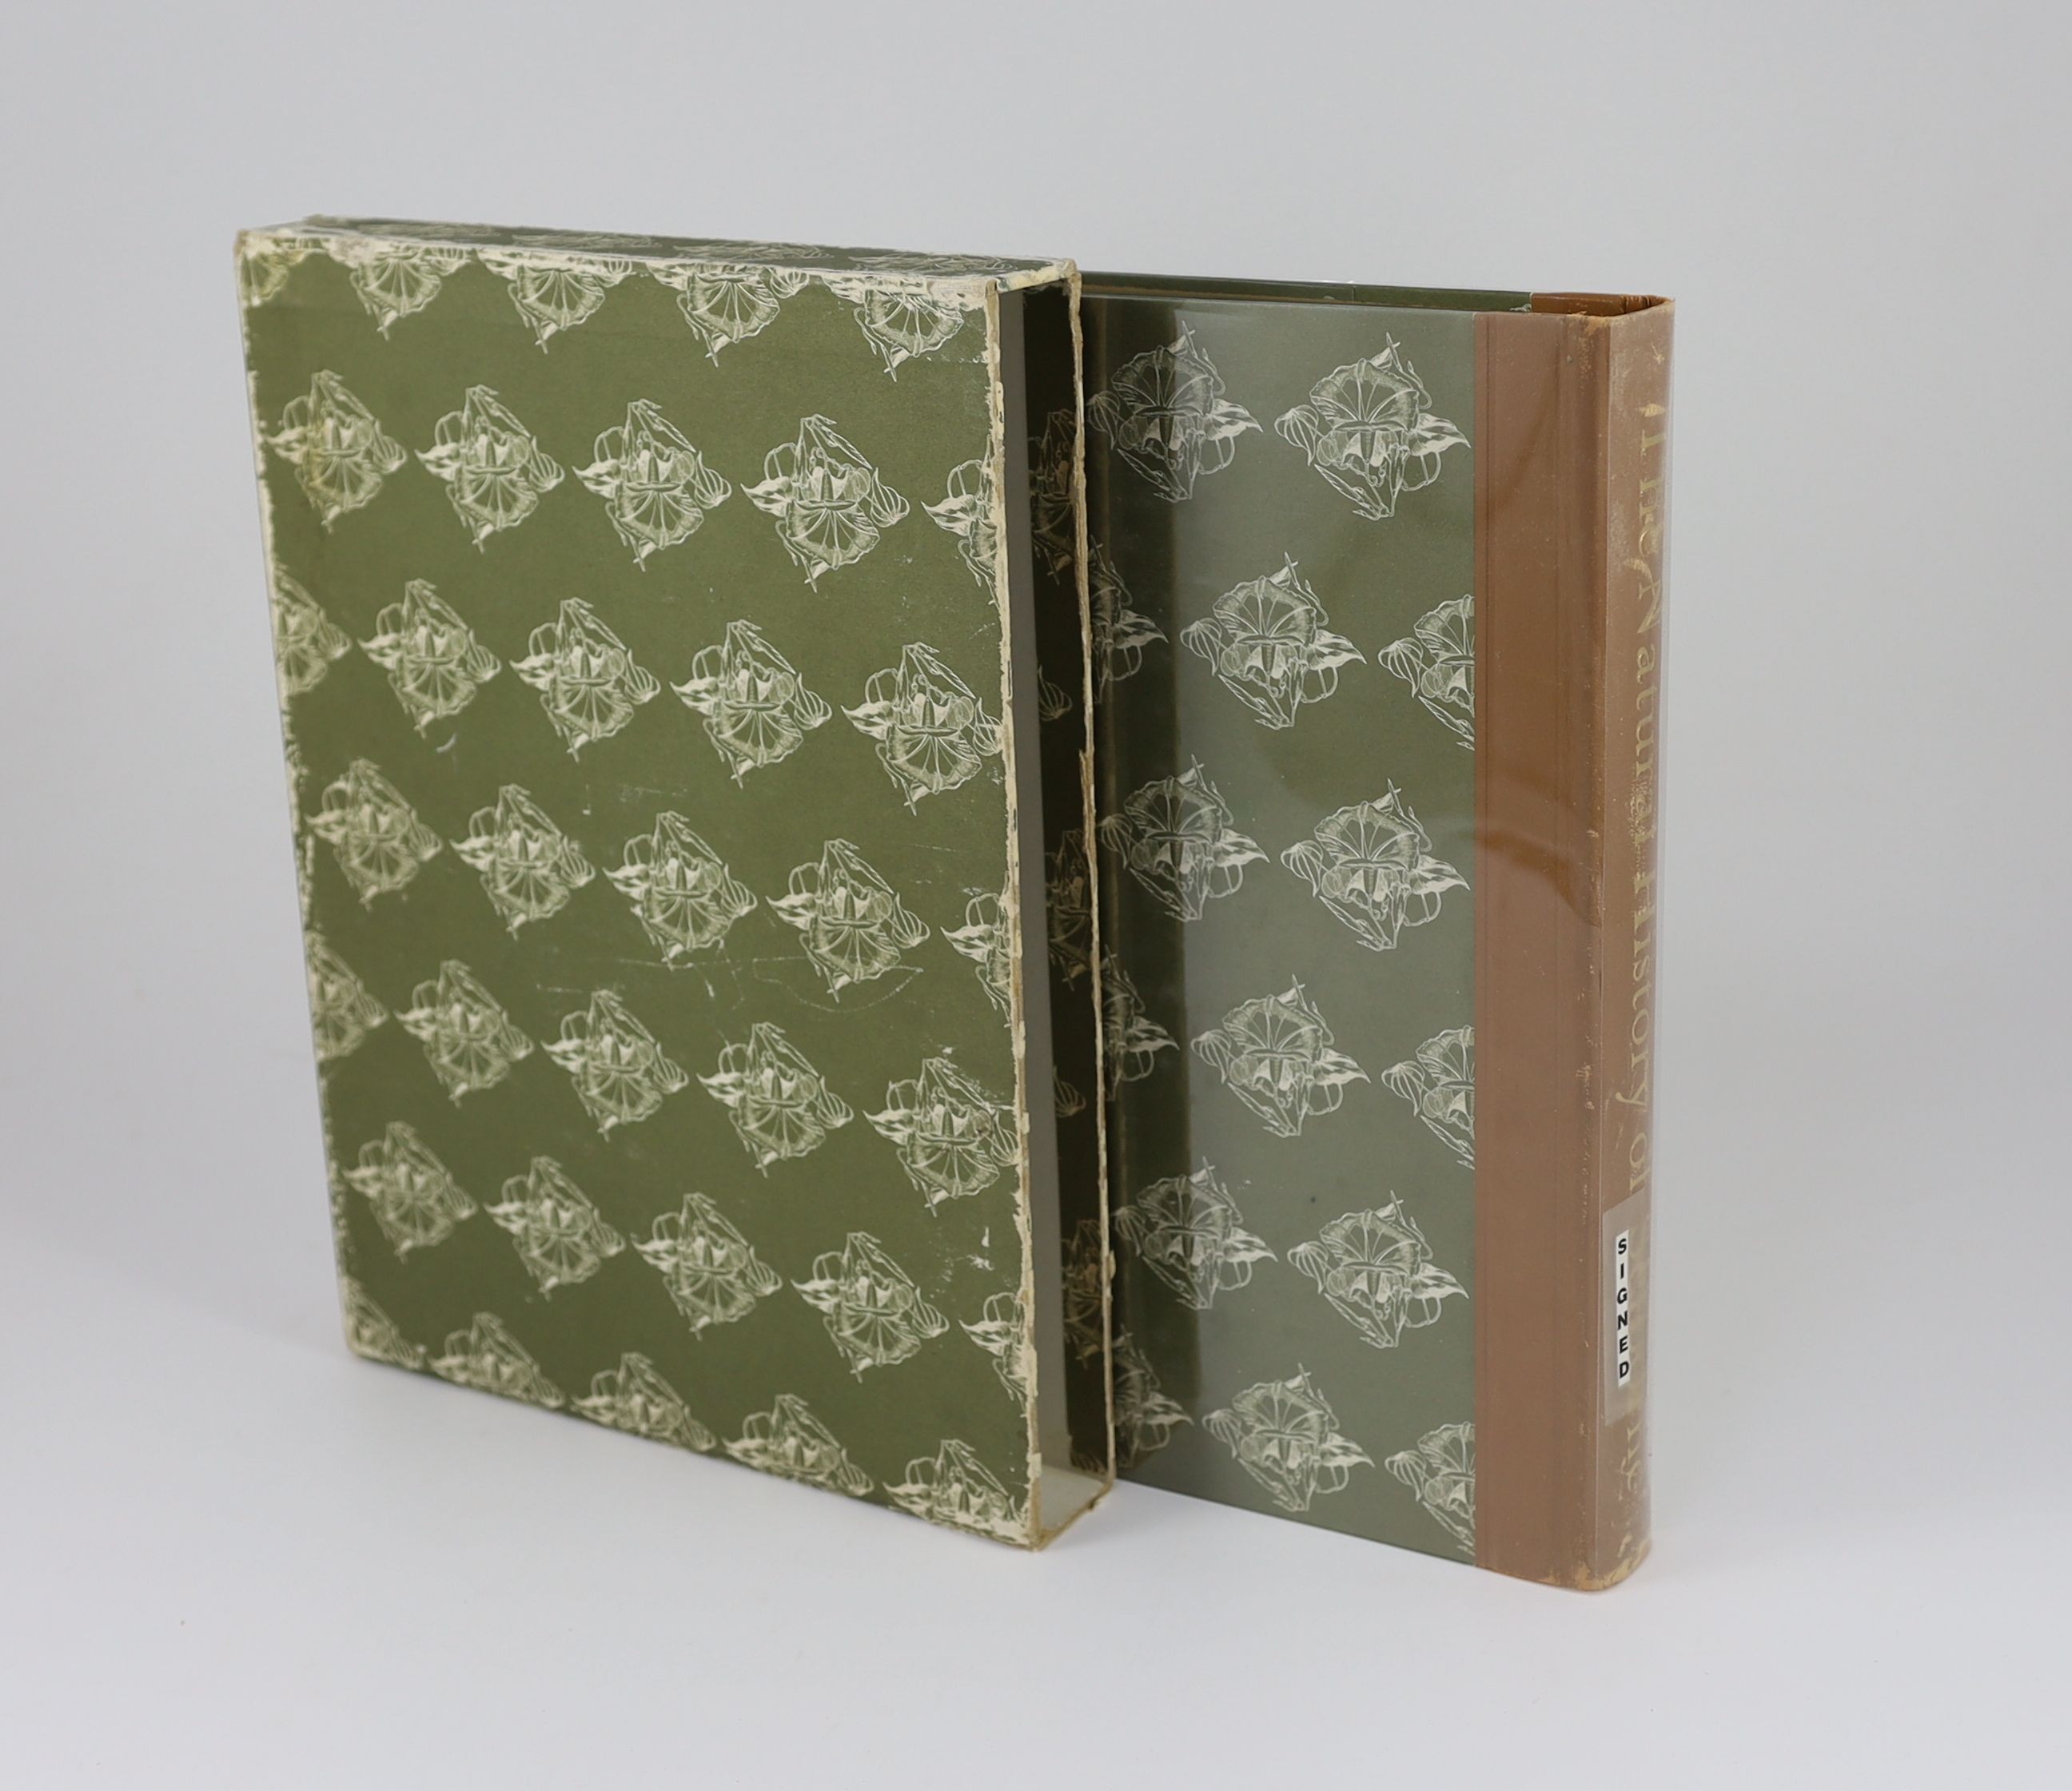 White, Gilbert - The Natural History of Selborne, one of 1500, signed and illustrated with 16 colour plates by John Nash, 4to, quarter gilt stamped calf, Limited Editions Club, Ipswich, 1972, with slip case.